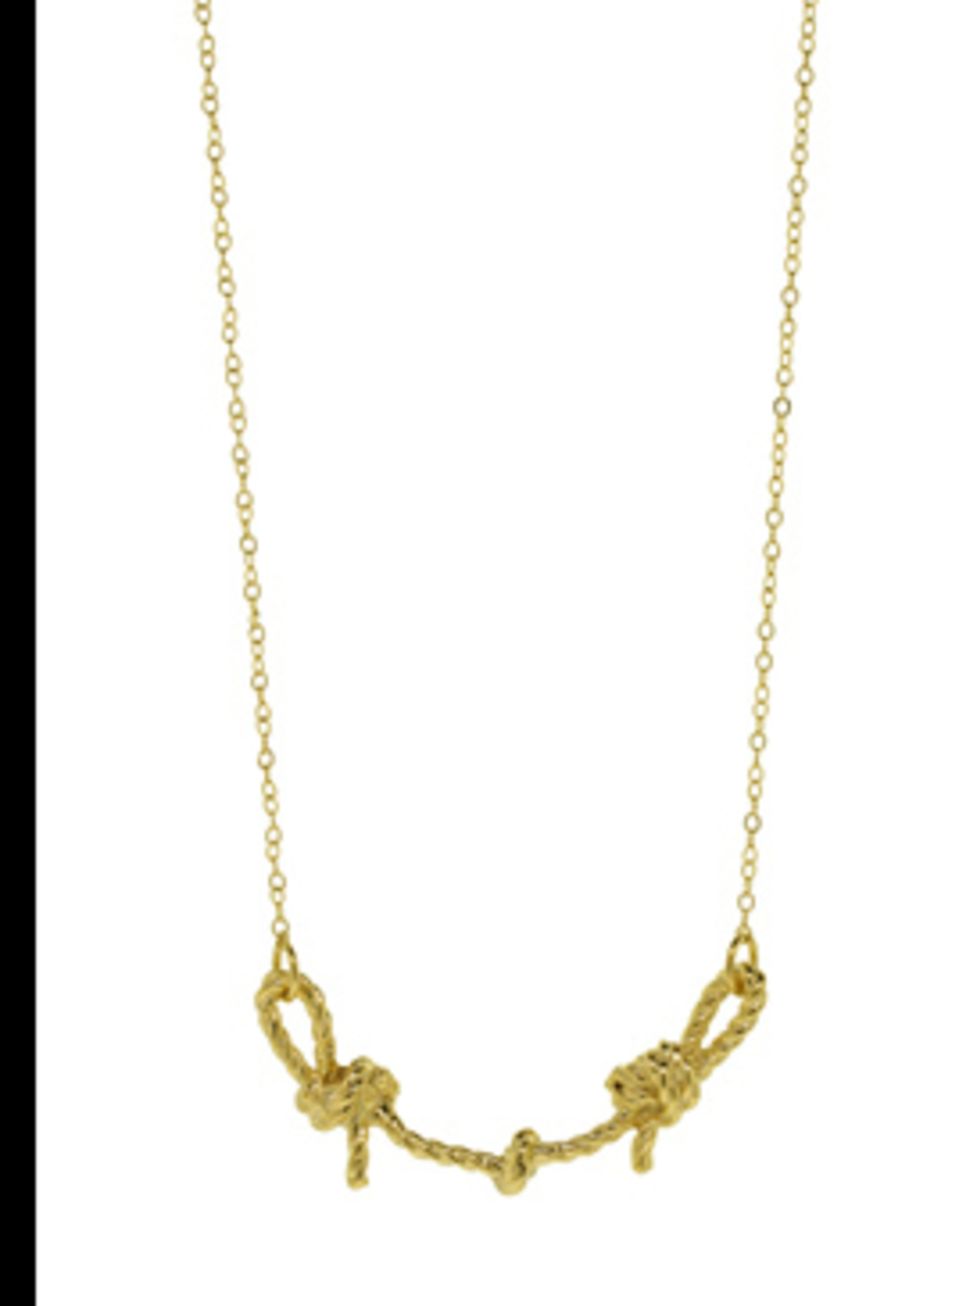 <p>Friendship Knot necklace, £135, by Sunday's Best at <a href="http://www.kabiri.co.uk/jewellery/necklaces/friendship_knot_necklacesilver">www.kabiri.co.uk</a></p>